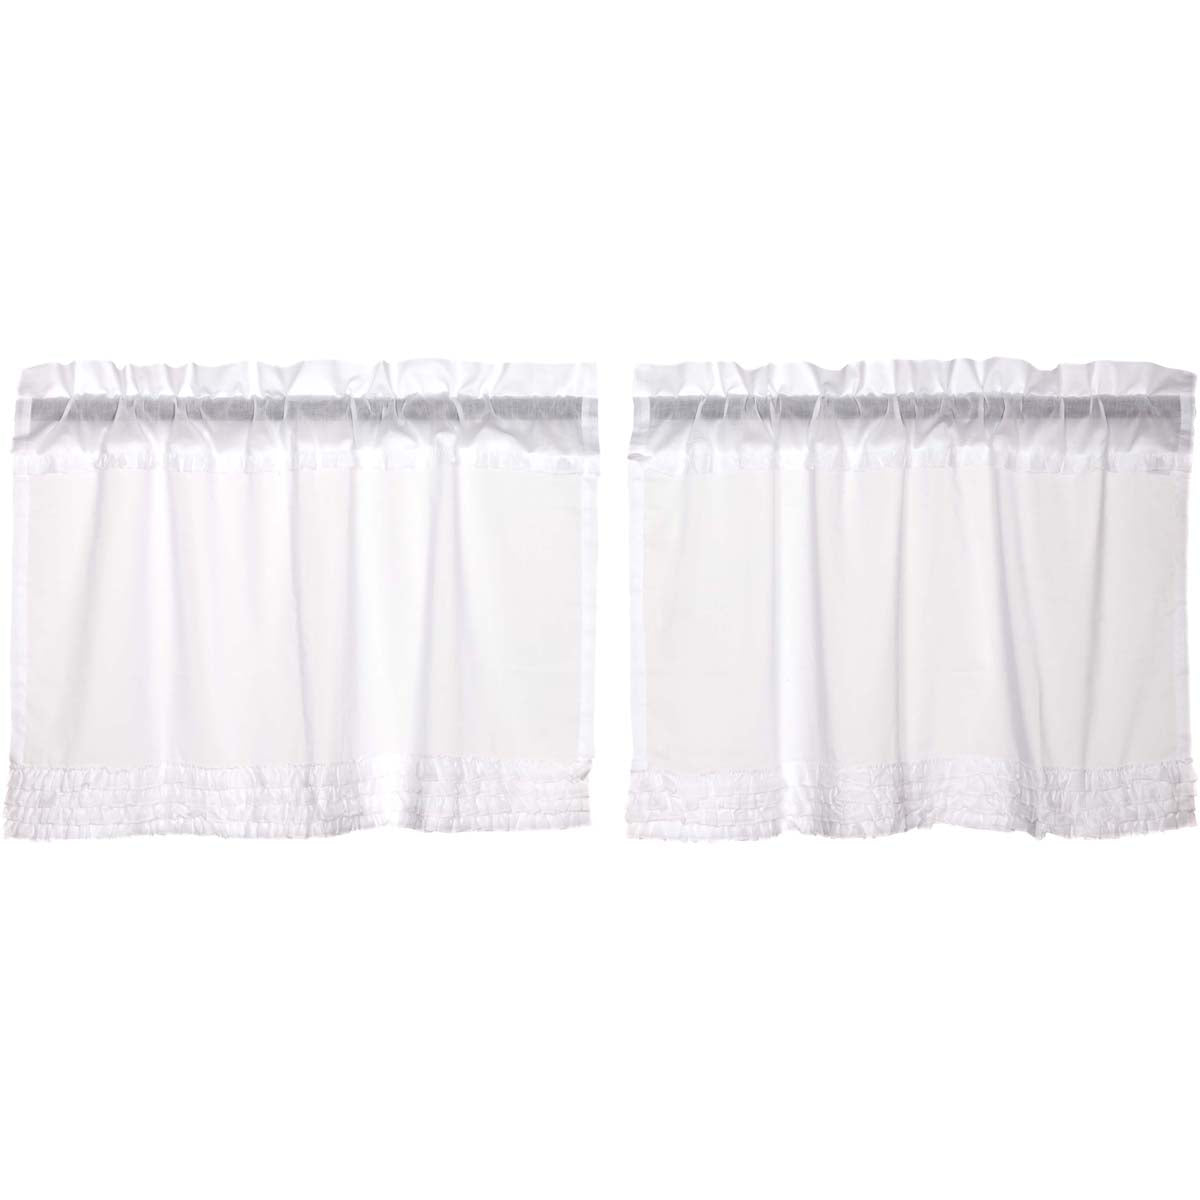 April & Olive White Ruffled Sheer Tier Set of 2 L24xW36 By VHC Brands